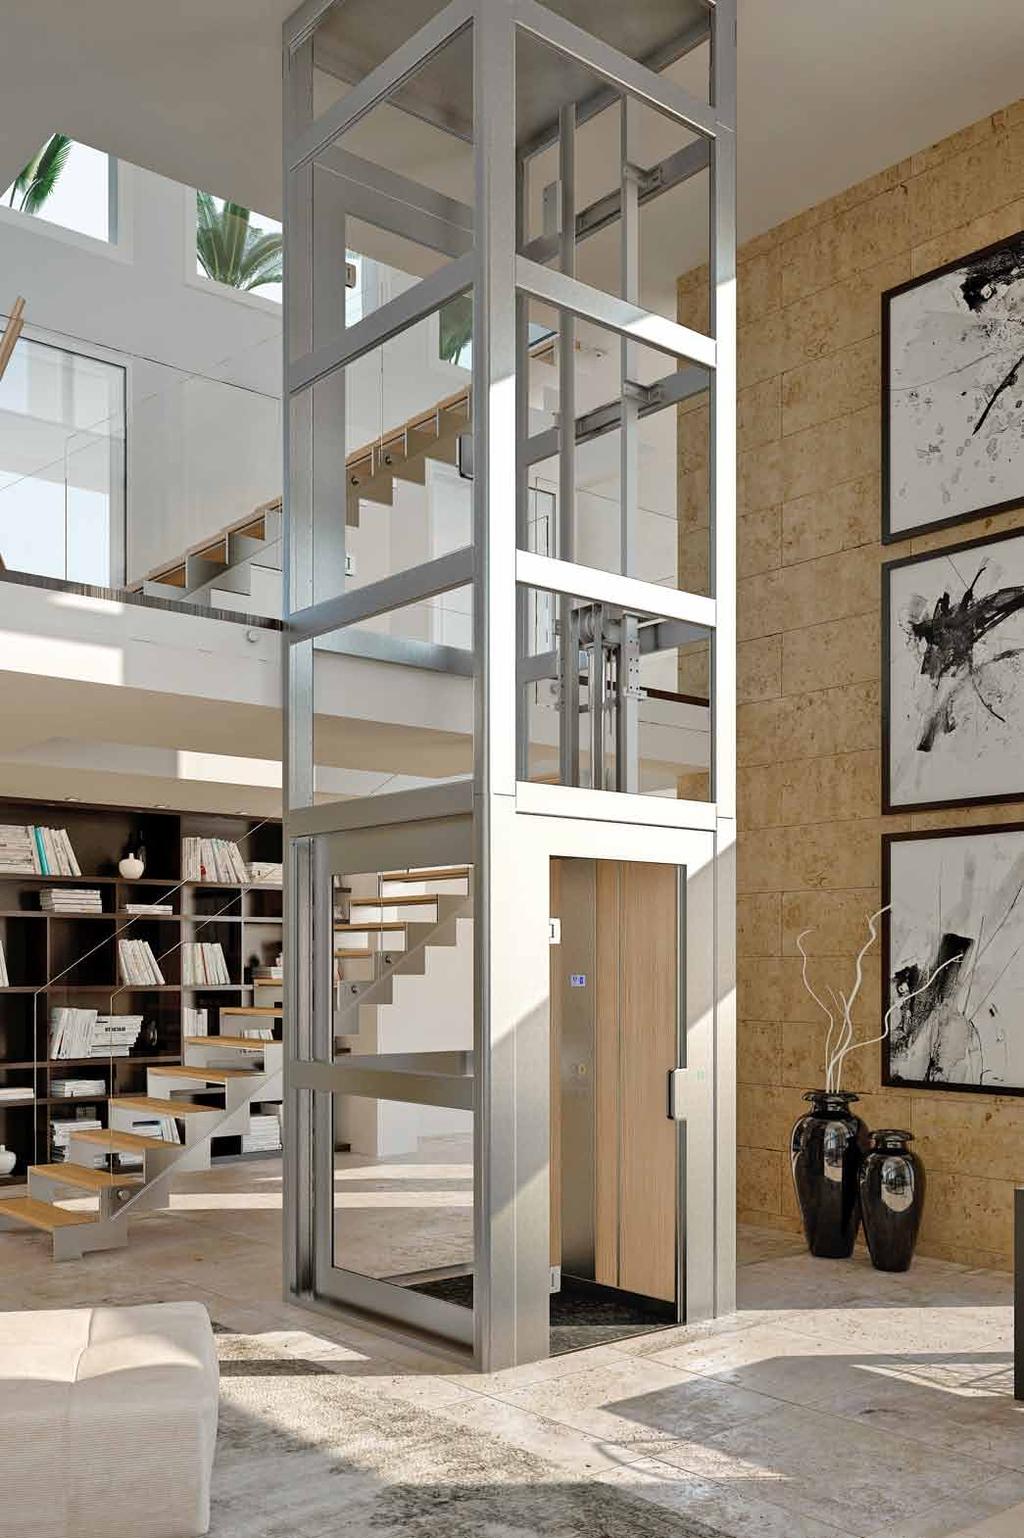 Gulliver and Orion Vertical Platform Lifts FOR HOME AND PUBLIC ACCESS Access BDD are